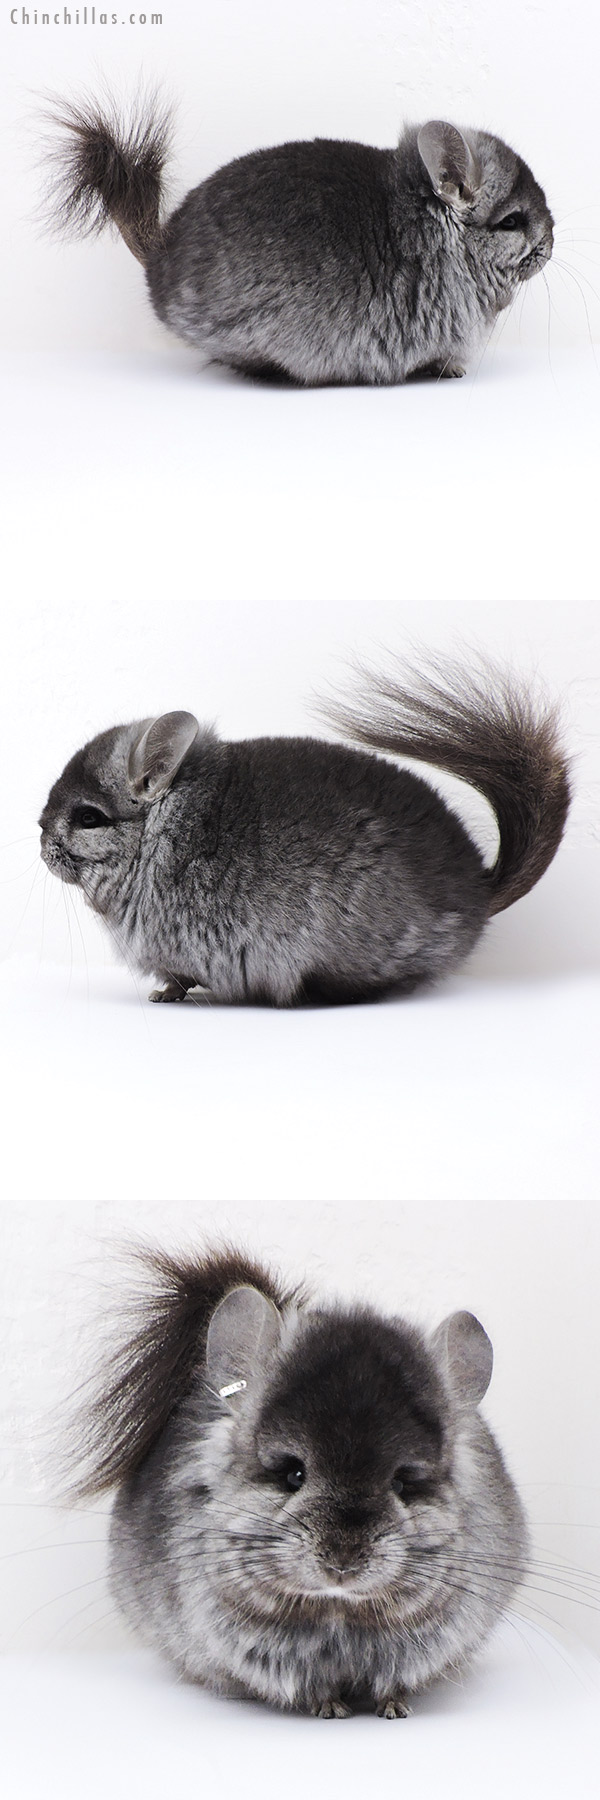 Chinchilla or related item offered for sale or export on Chinchillas.com - 18079 Ebony Brevi Type  Royal Persian Angora ( Locken Carrier ) Male Chinchilla